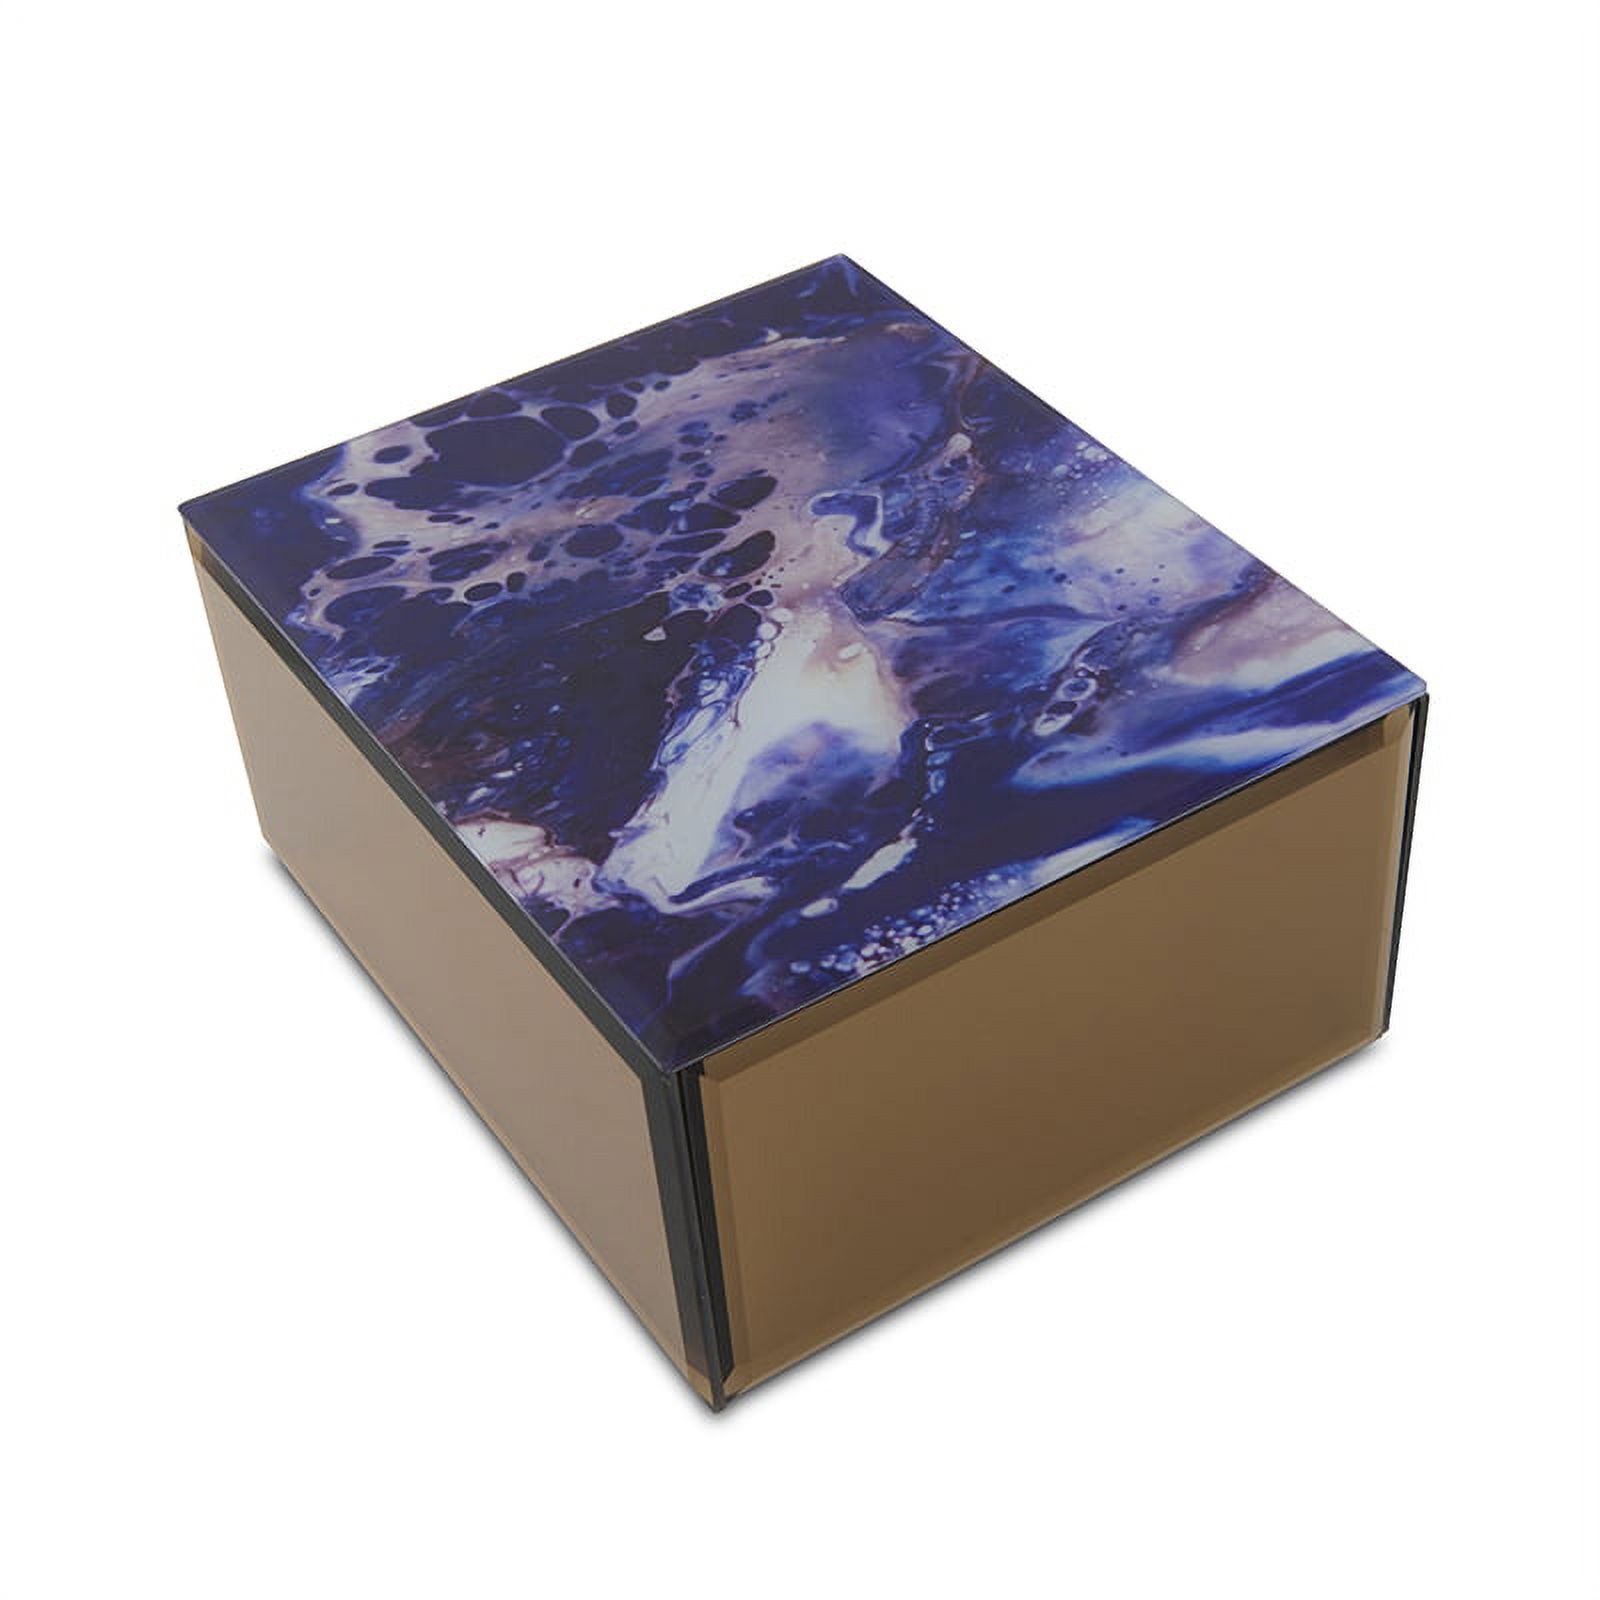 OneWorld Memorials Glass Memorial Urn For Cats And Dogs - Large 130 Pounds - Blue And White  - Engraving Sold Separately - image 1 of 6